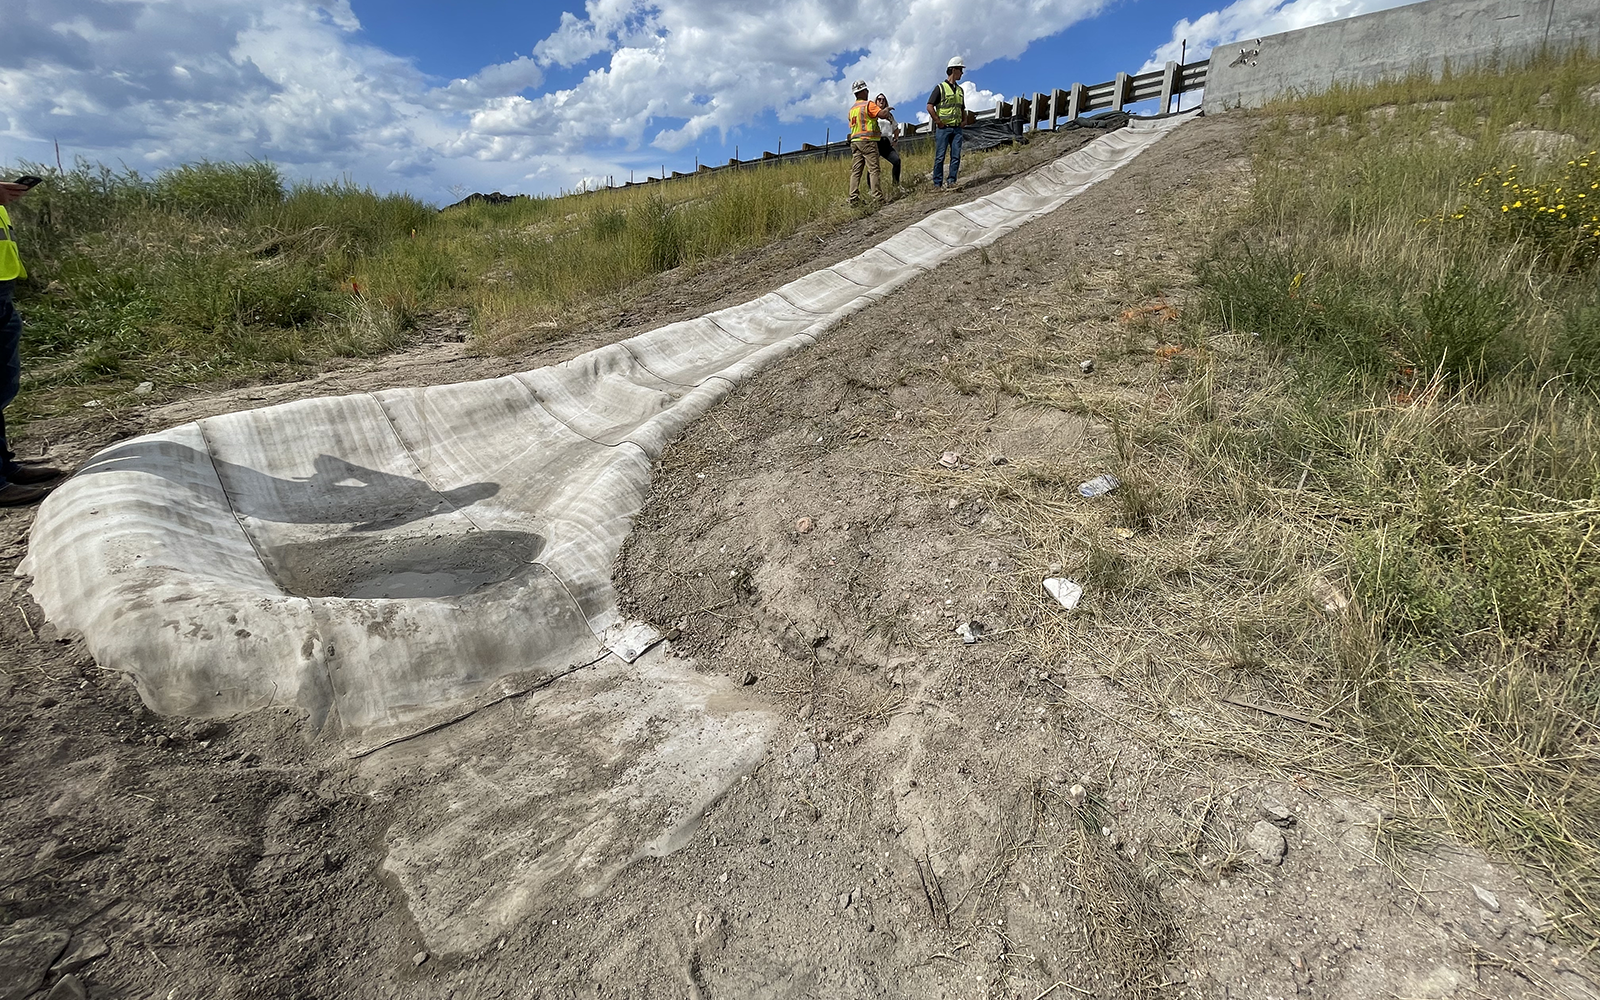 Concrete Canvas Used as Ditch Lining to Provide Erosion Control